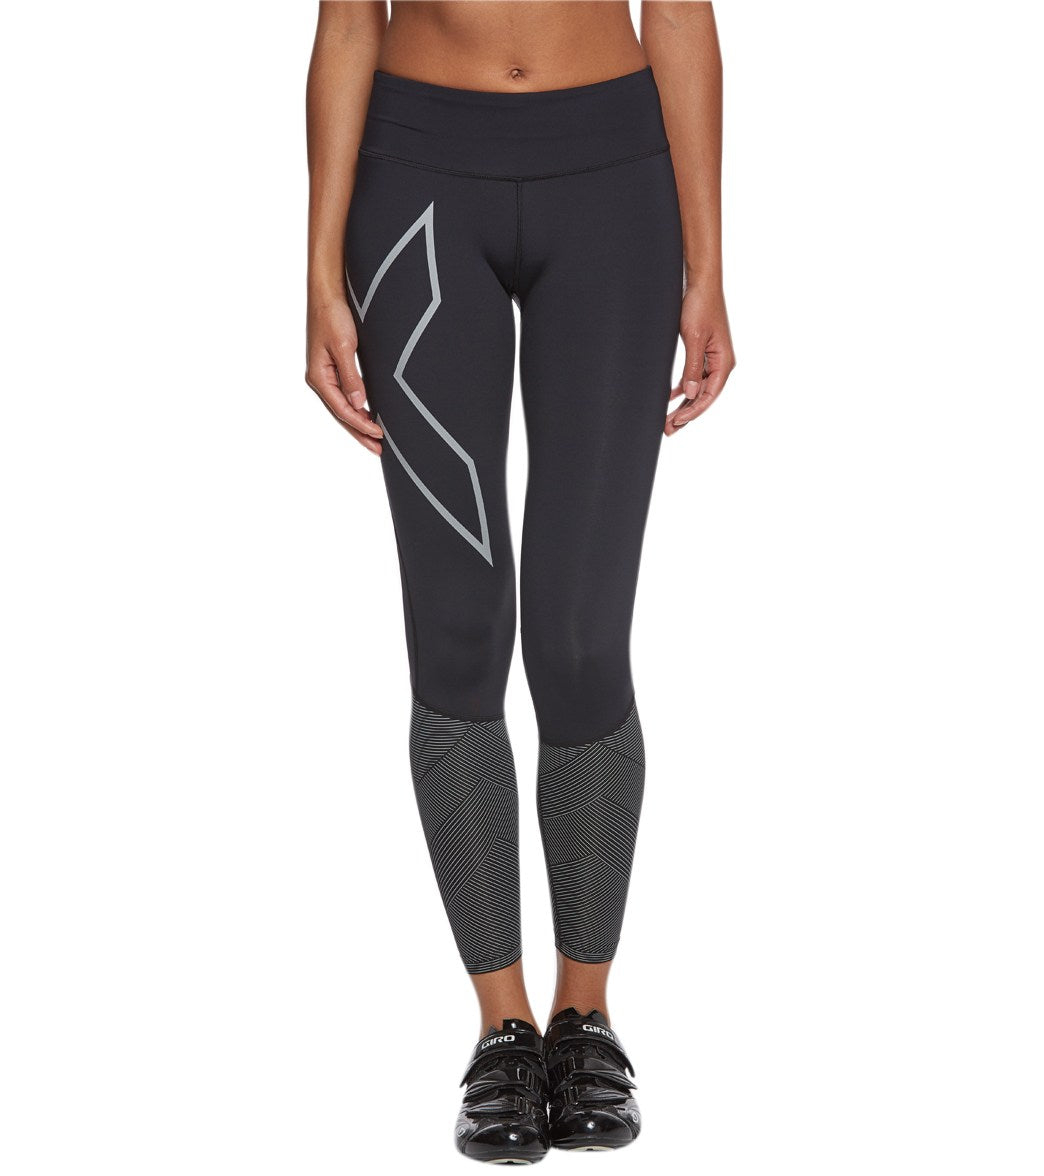 Women's Mid-Rise Reflect Compression Tights at SwimOutlet.com